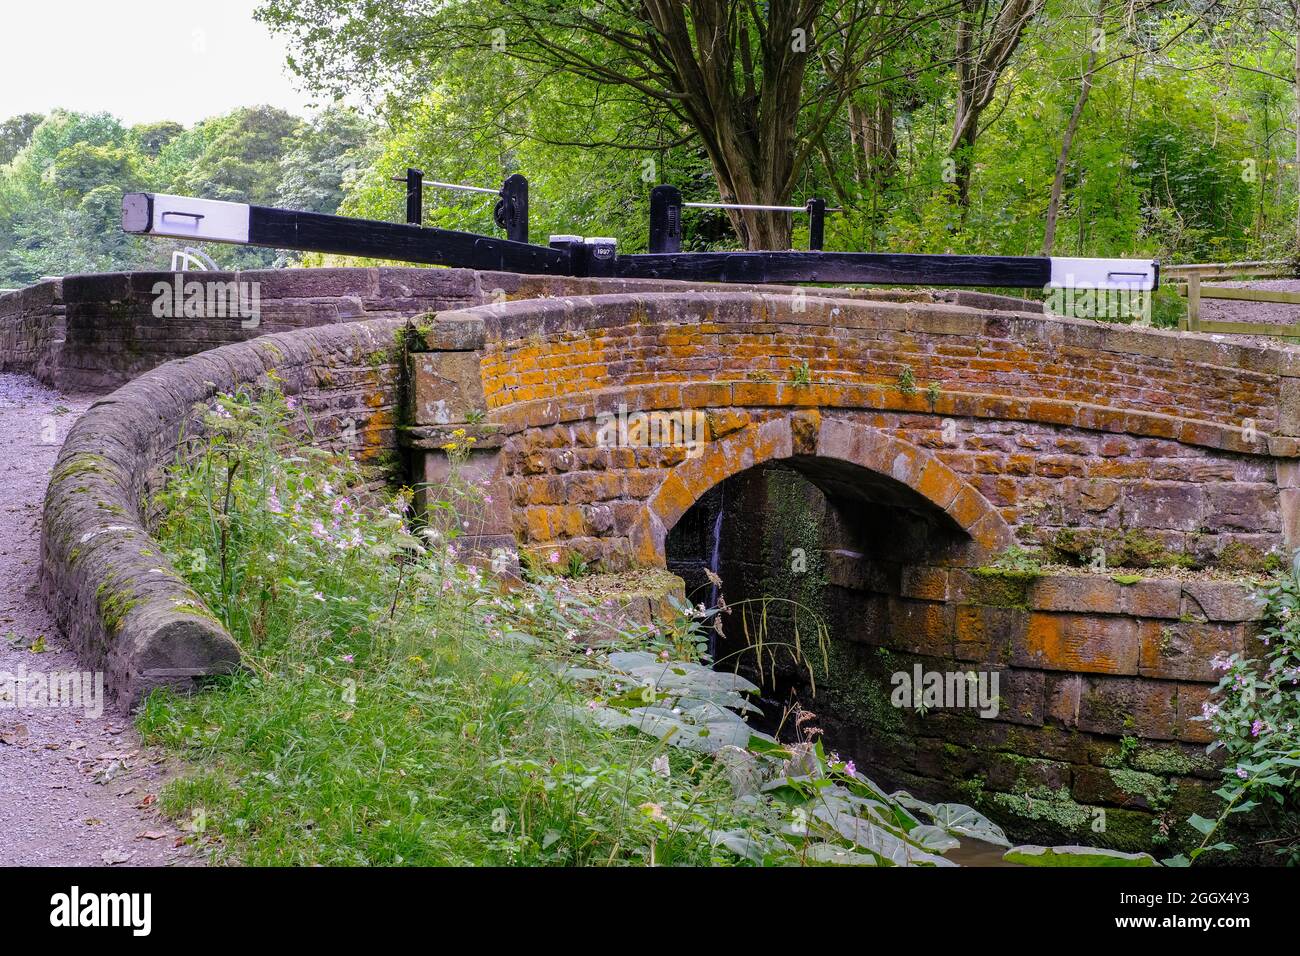 A beautiful stone bridge spanning the canal near Marple, Cheshire with imposing black and white painted lock gates . Stock Photo